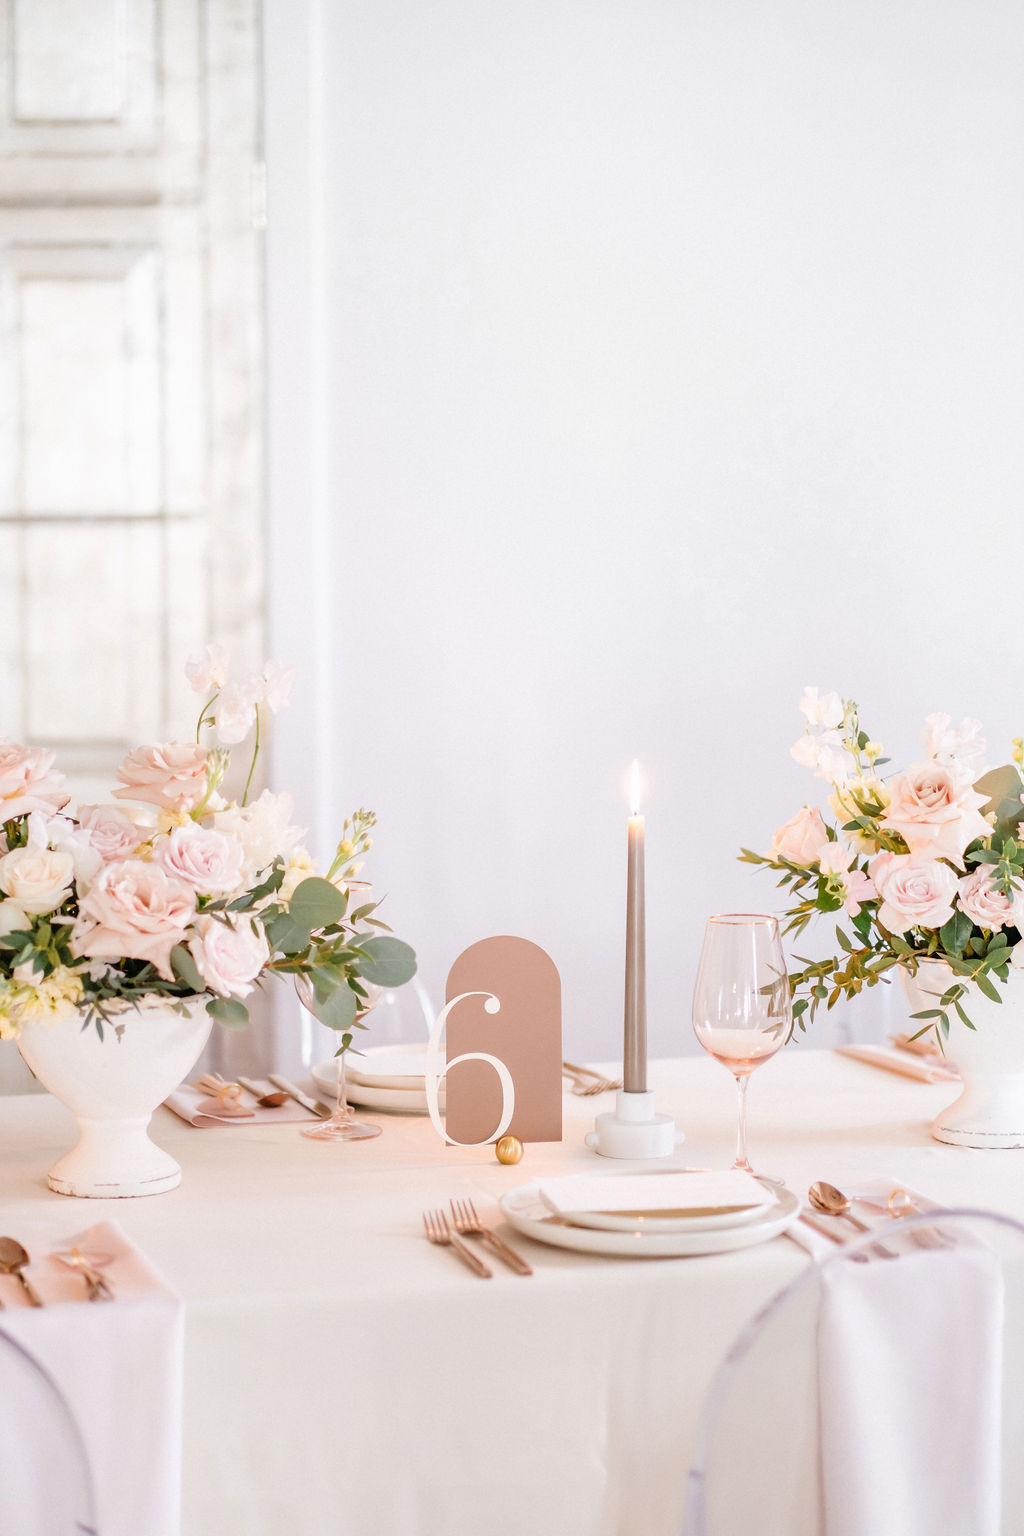 Contemporary wedding inspiration tablescape styled by Melissa Dawn Event Design